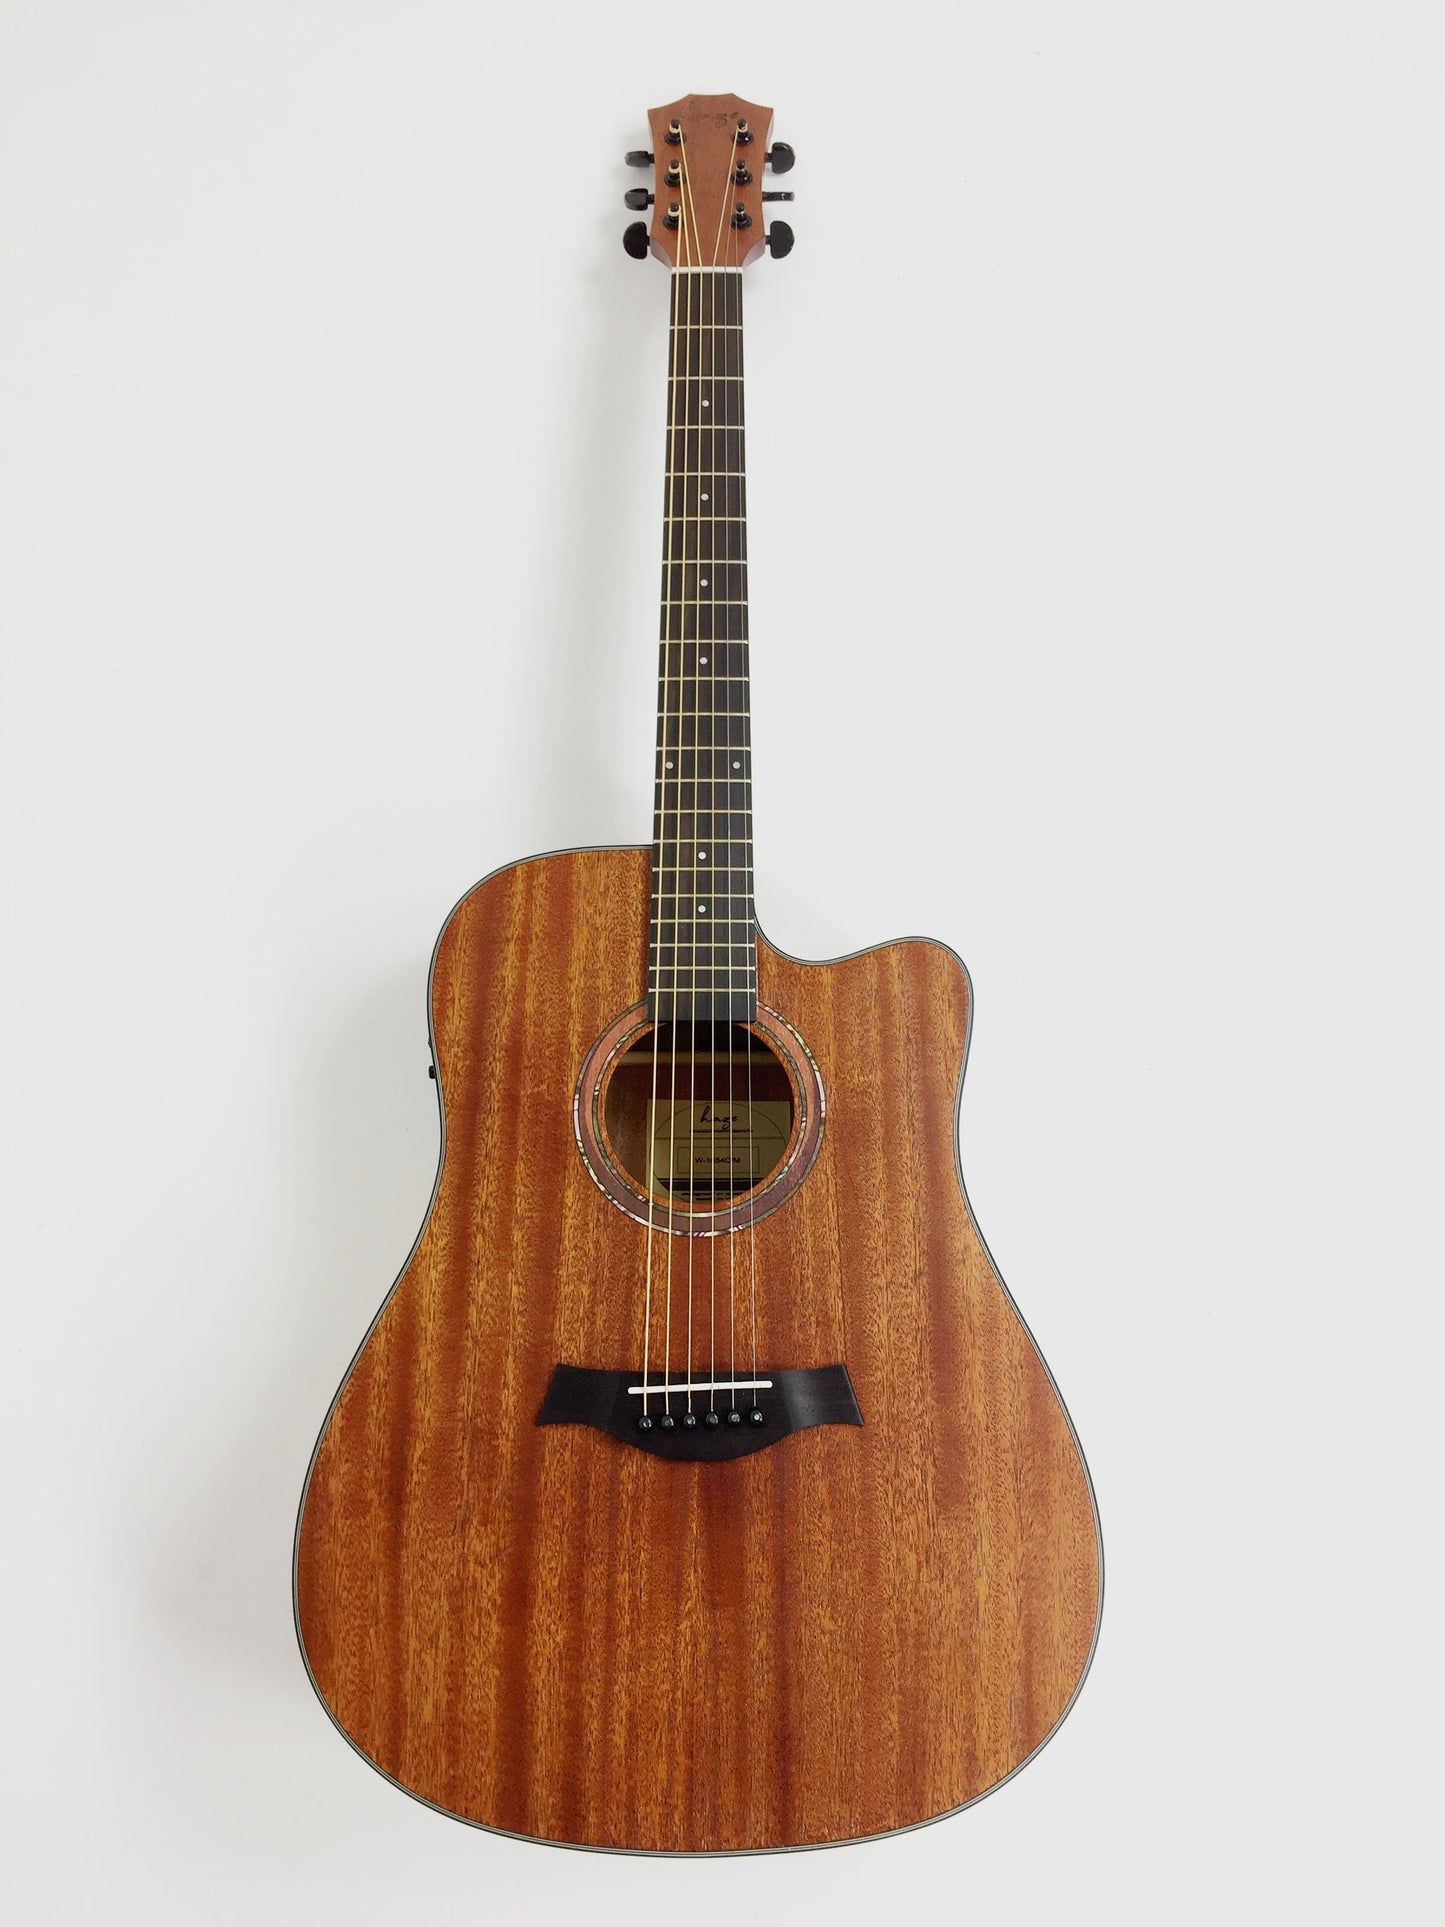 Haze W1654CEQM Solid Mahogany Top Built in Tuner/EQ Electro-Acoustic Guitar, 10W Amp, Accessories Pack